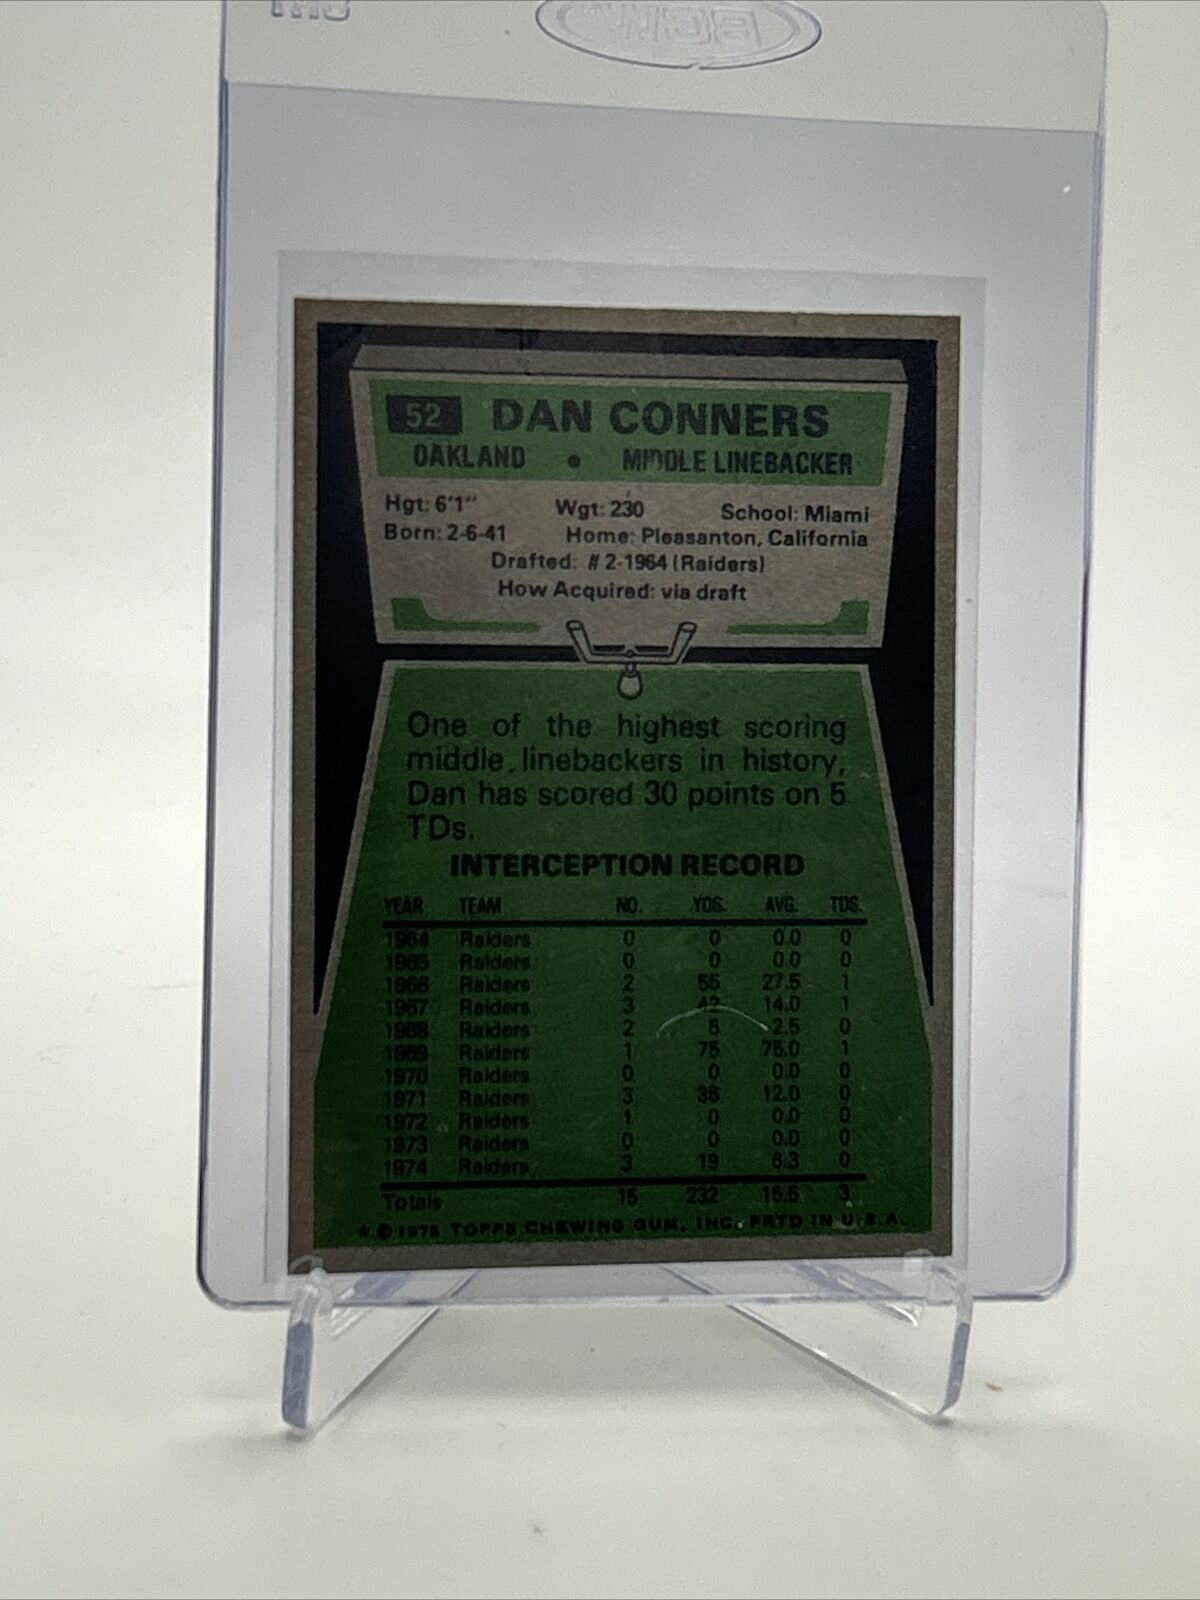 1975 Topps Dan Conners Football Card #52 NM Quality FREE SHIPPING